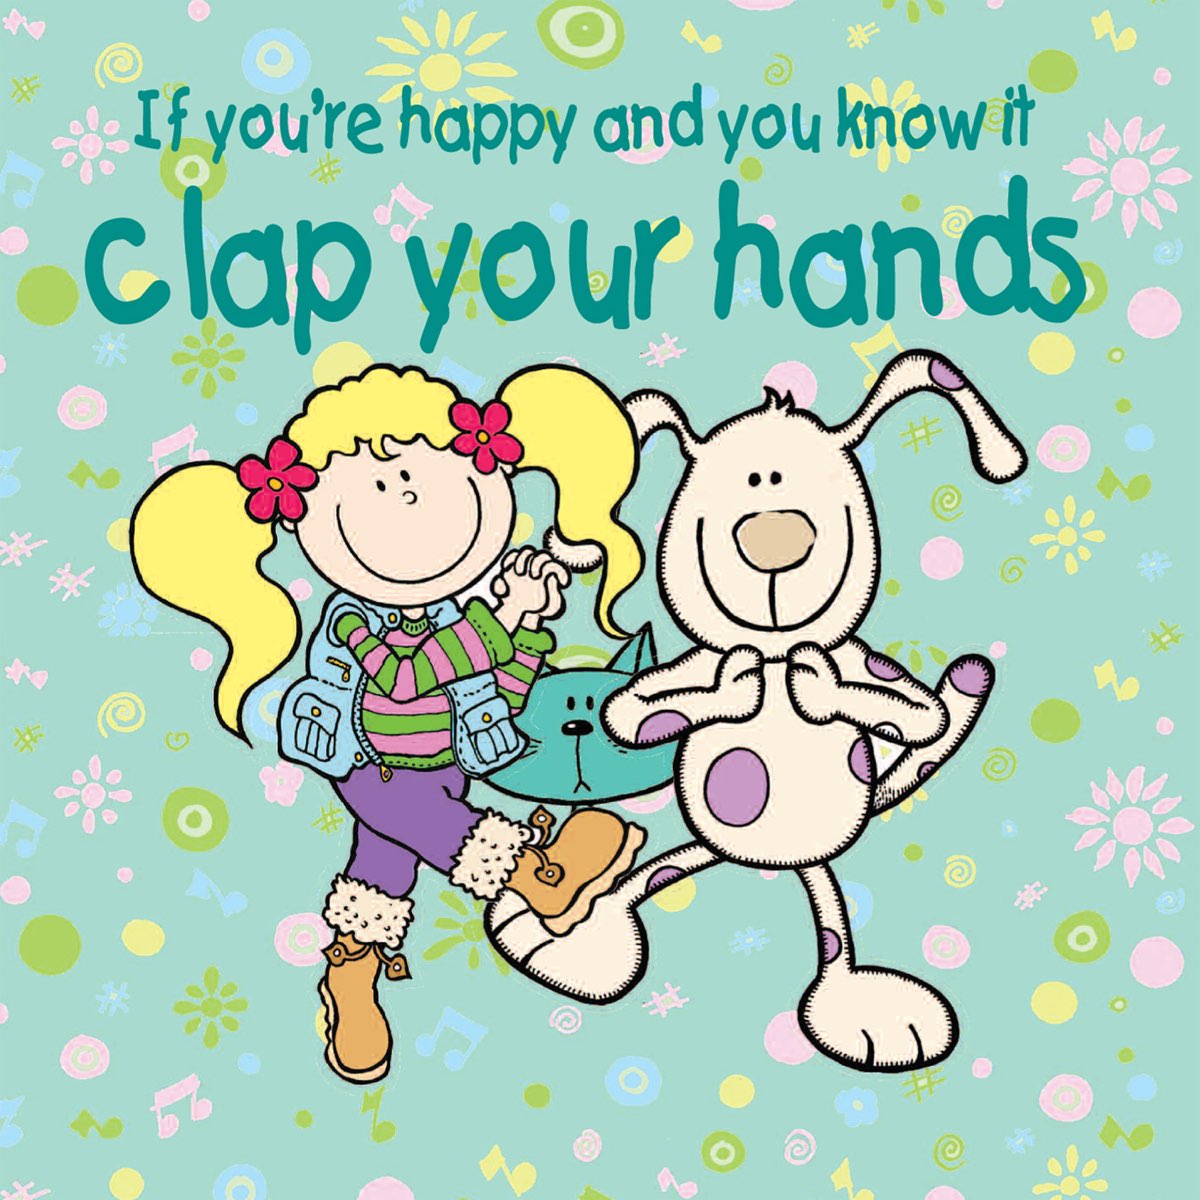 Together like you and me. If you Happy Clap your hands. If you Happy and you know it Clap your hands. If you Happy Happy Happy Clap your hands real Life. If you Happy Clap your hands Worksheets.